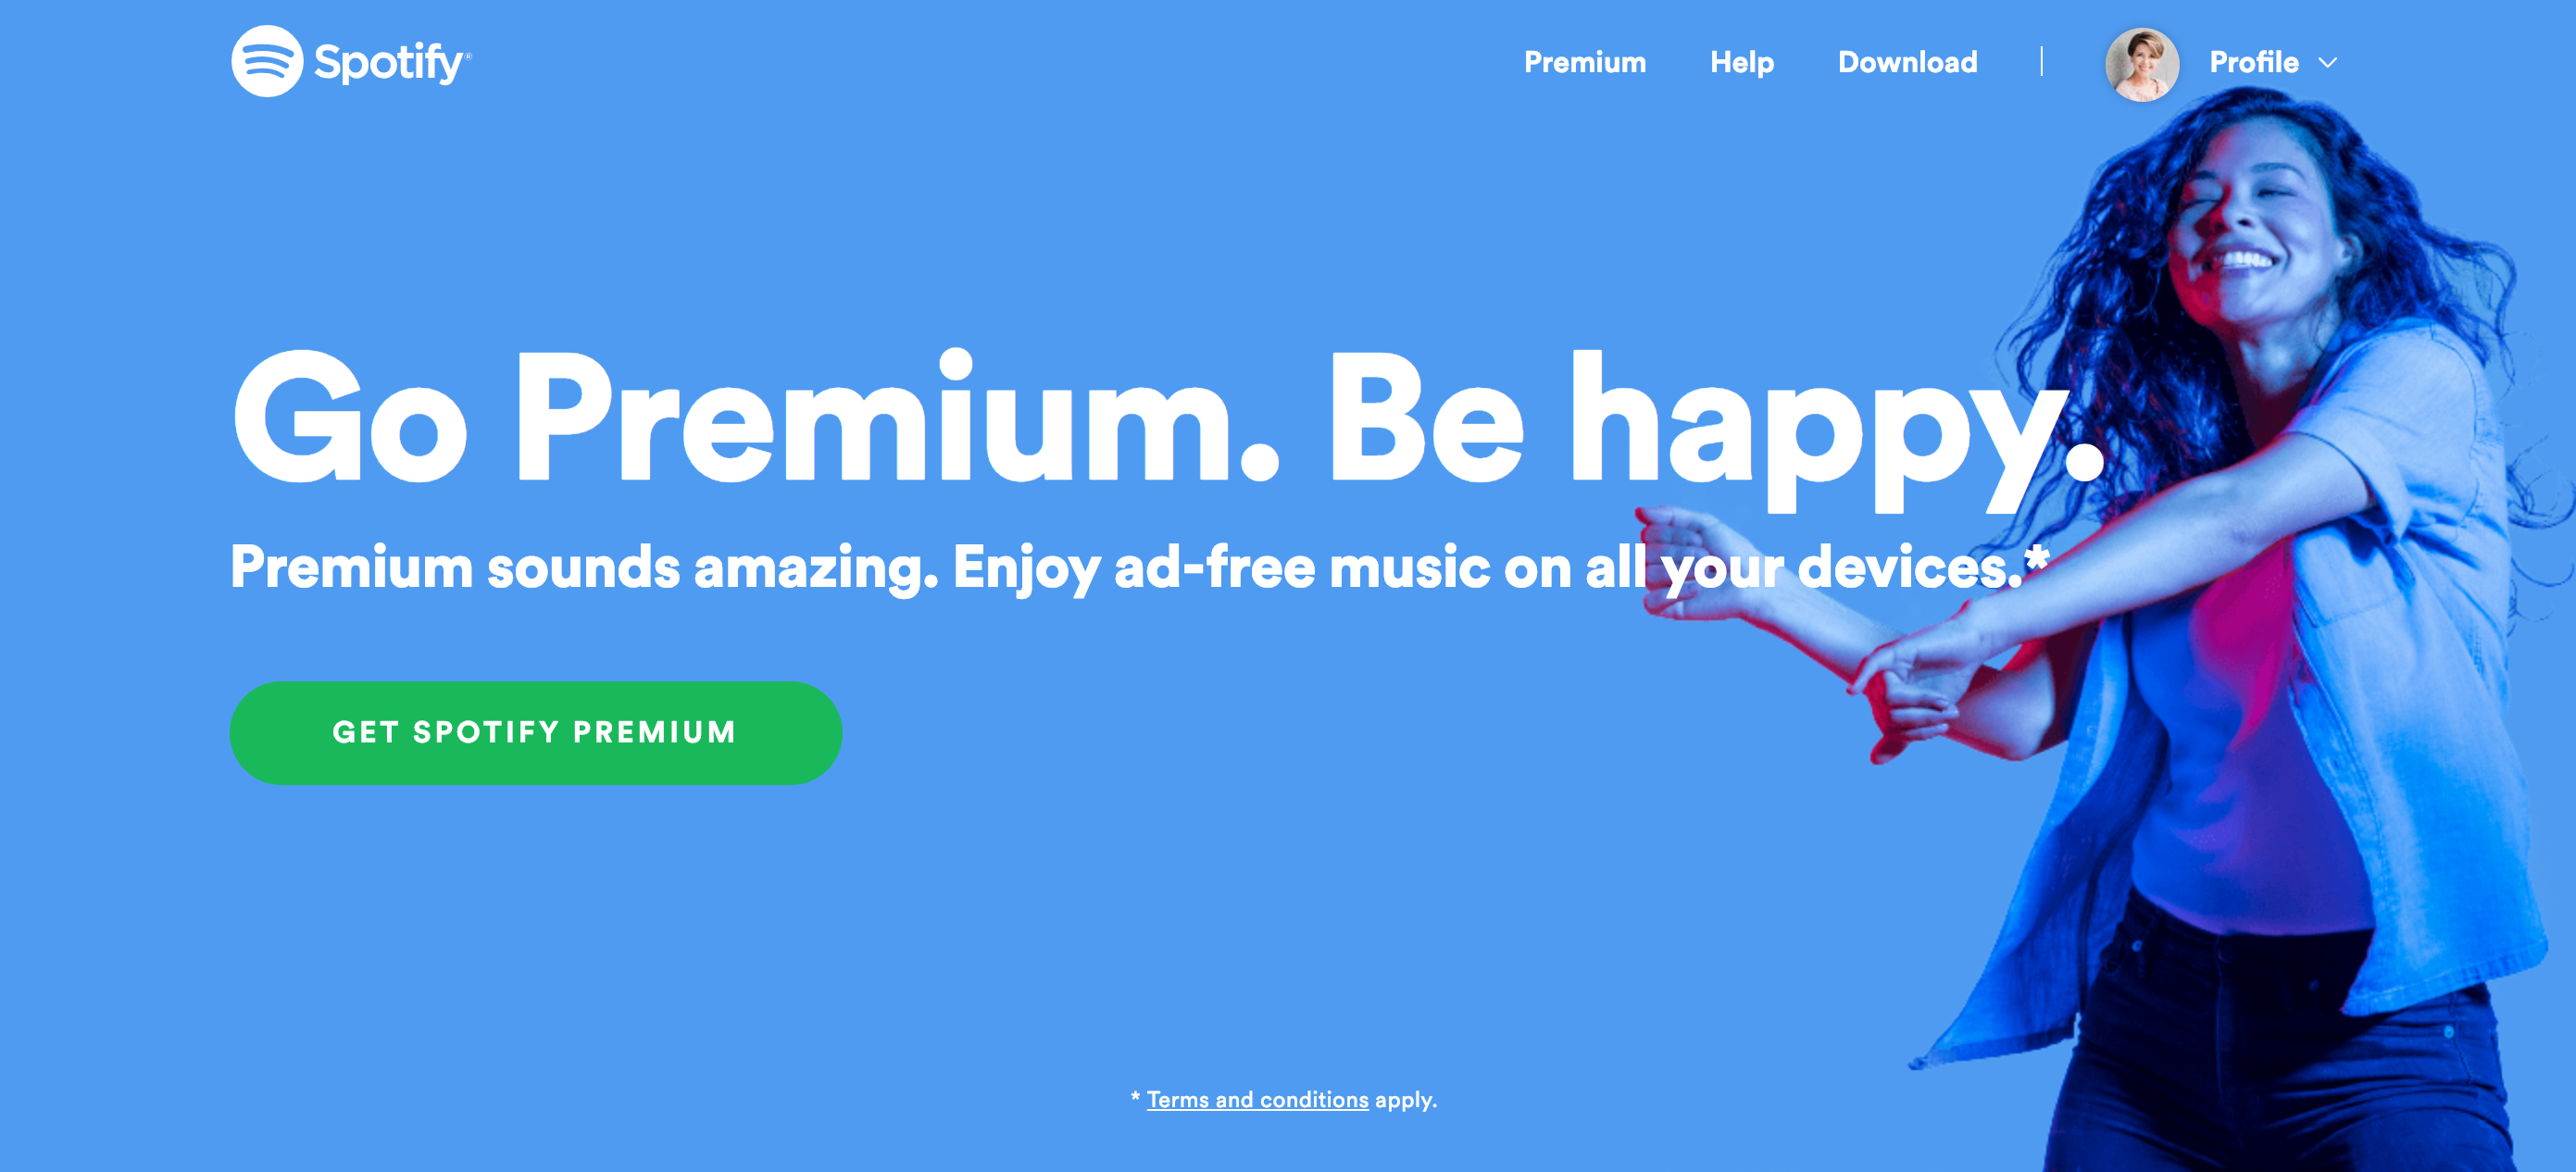 Spotify Value Proposition